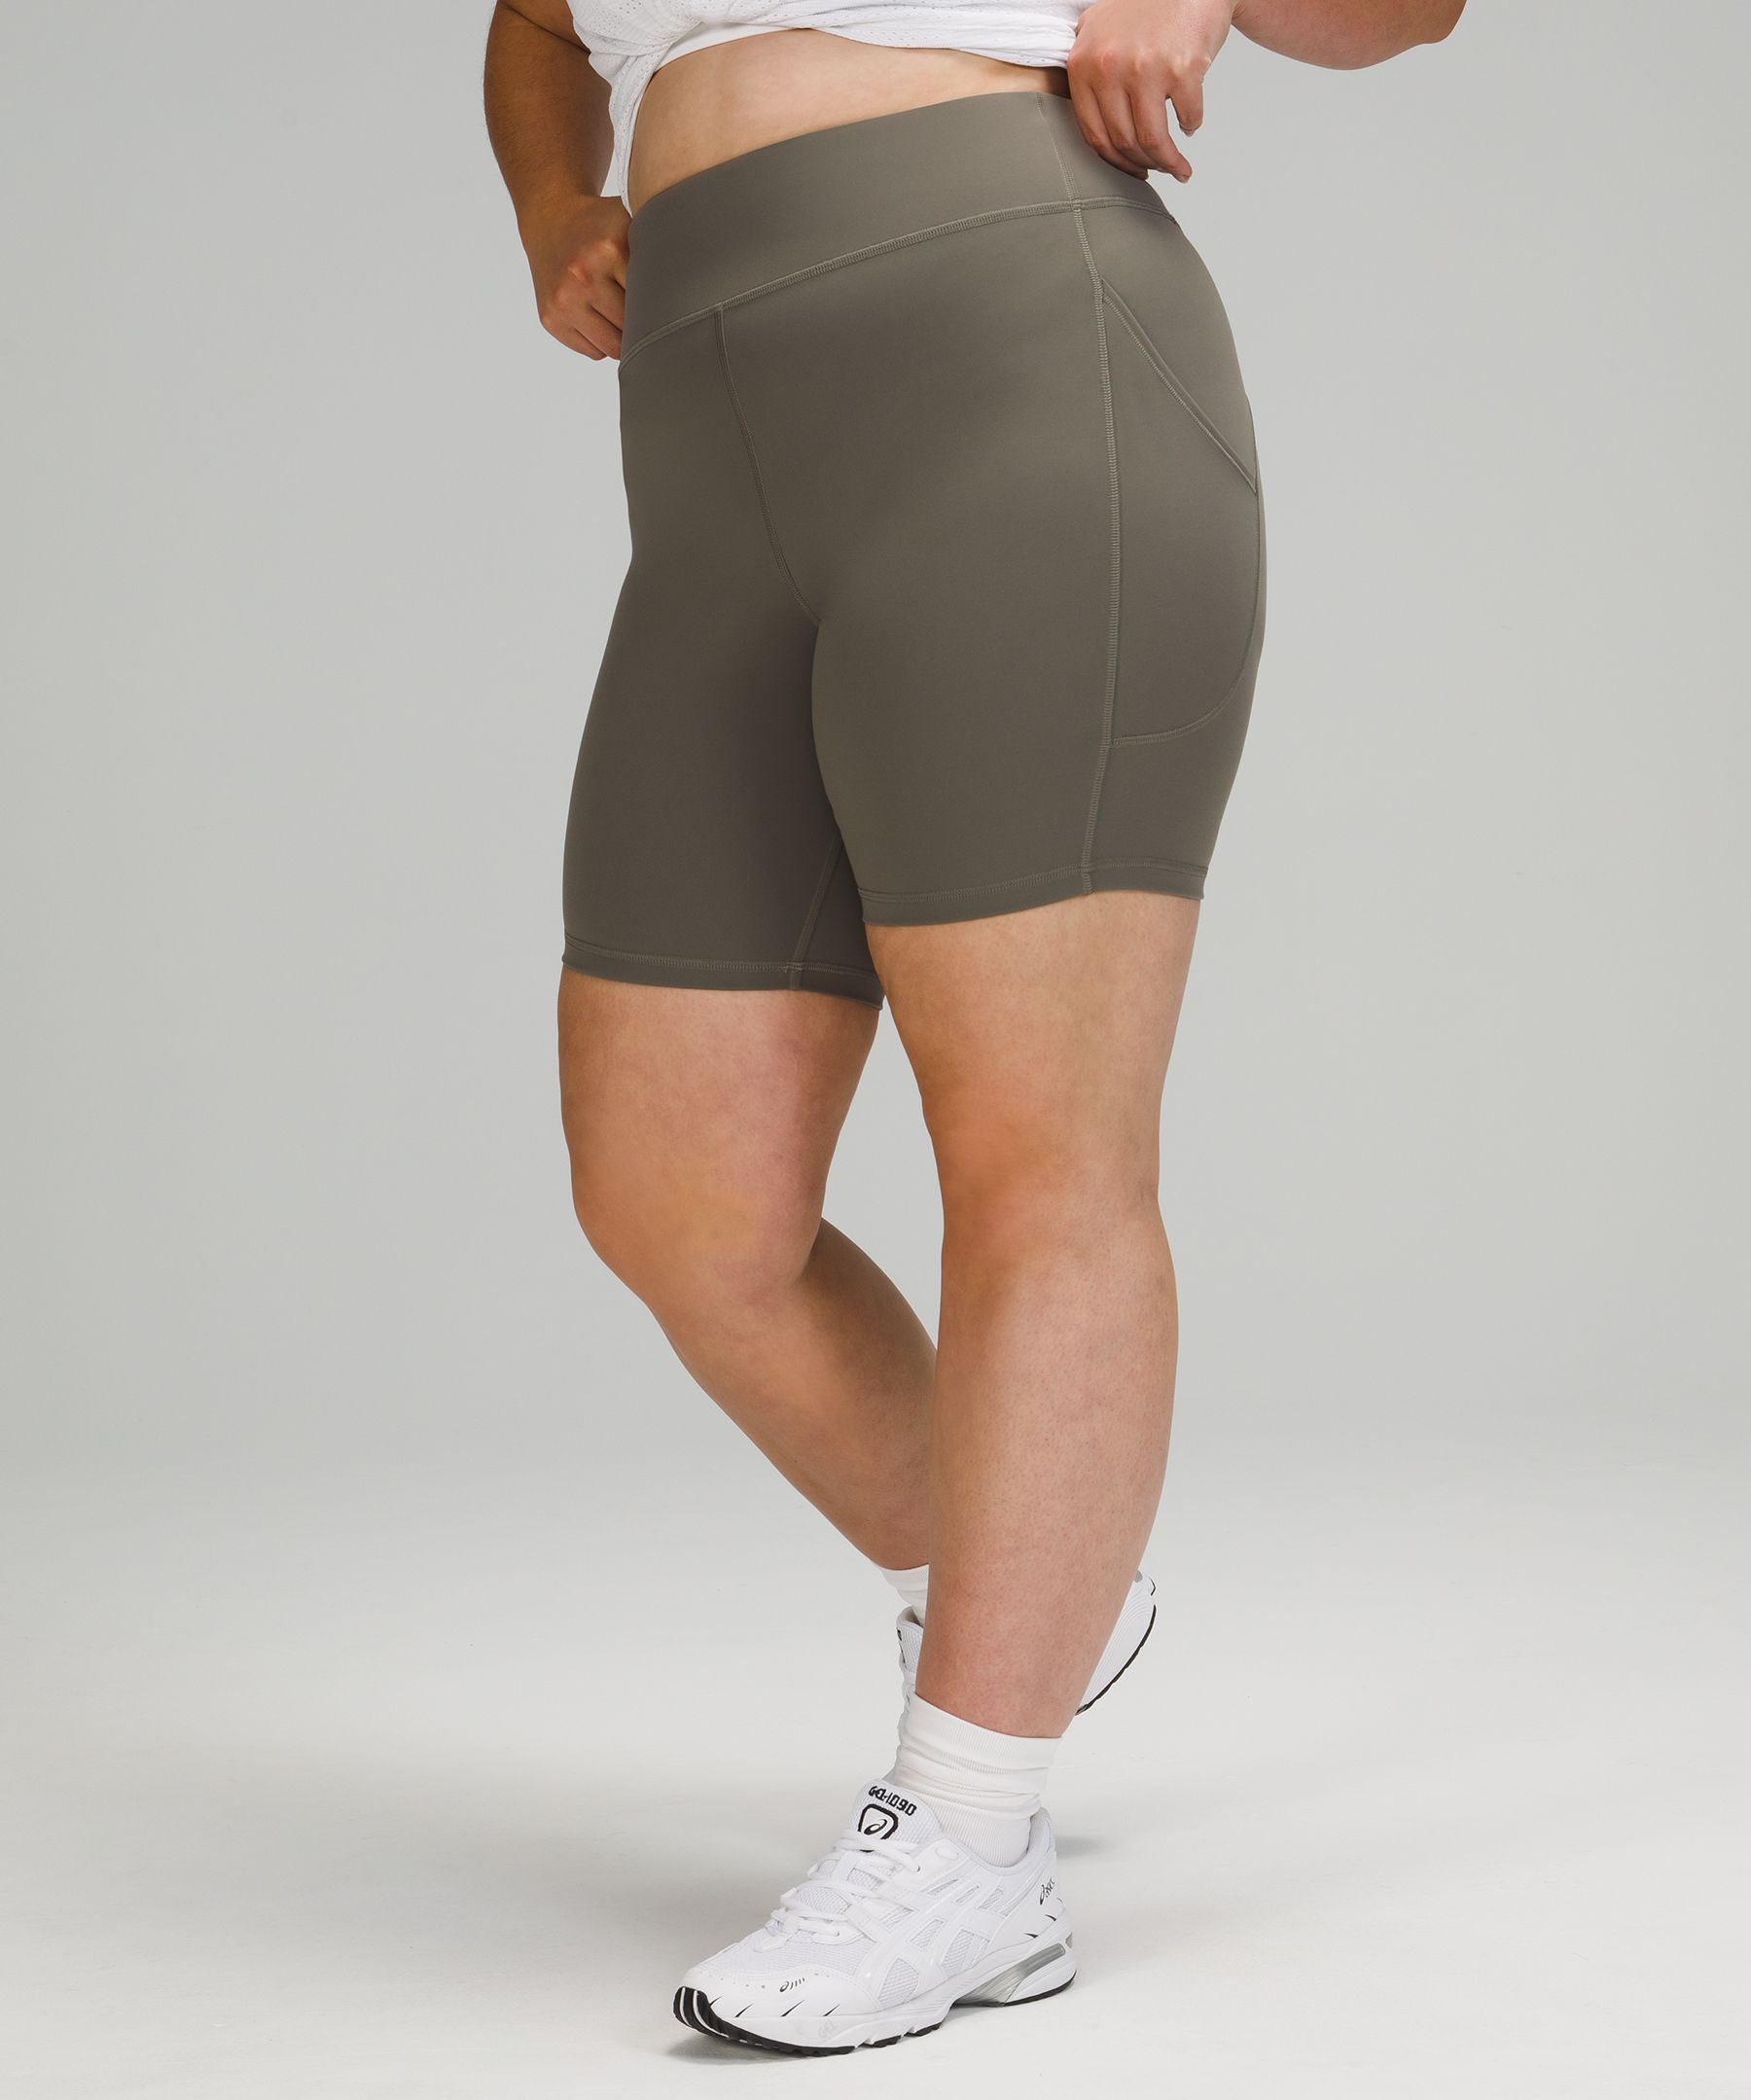 Lululemon Bike Shorts Review - Best Bike Shorts for Working Out